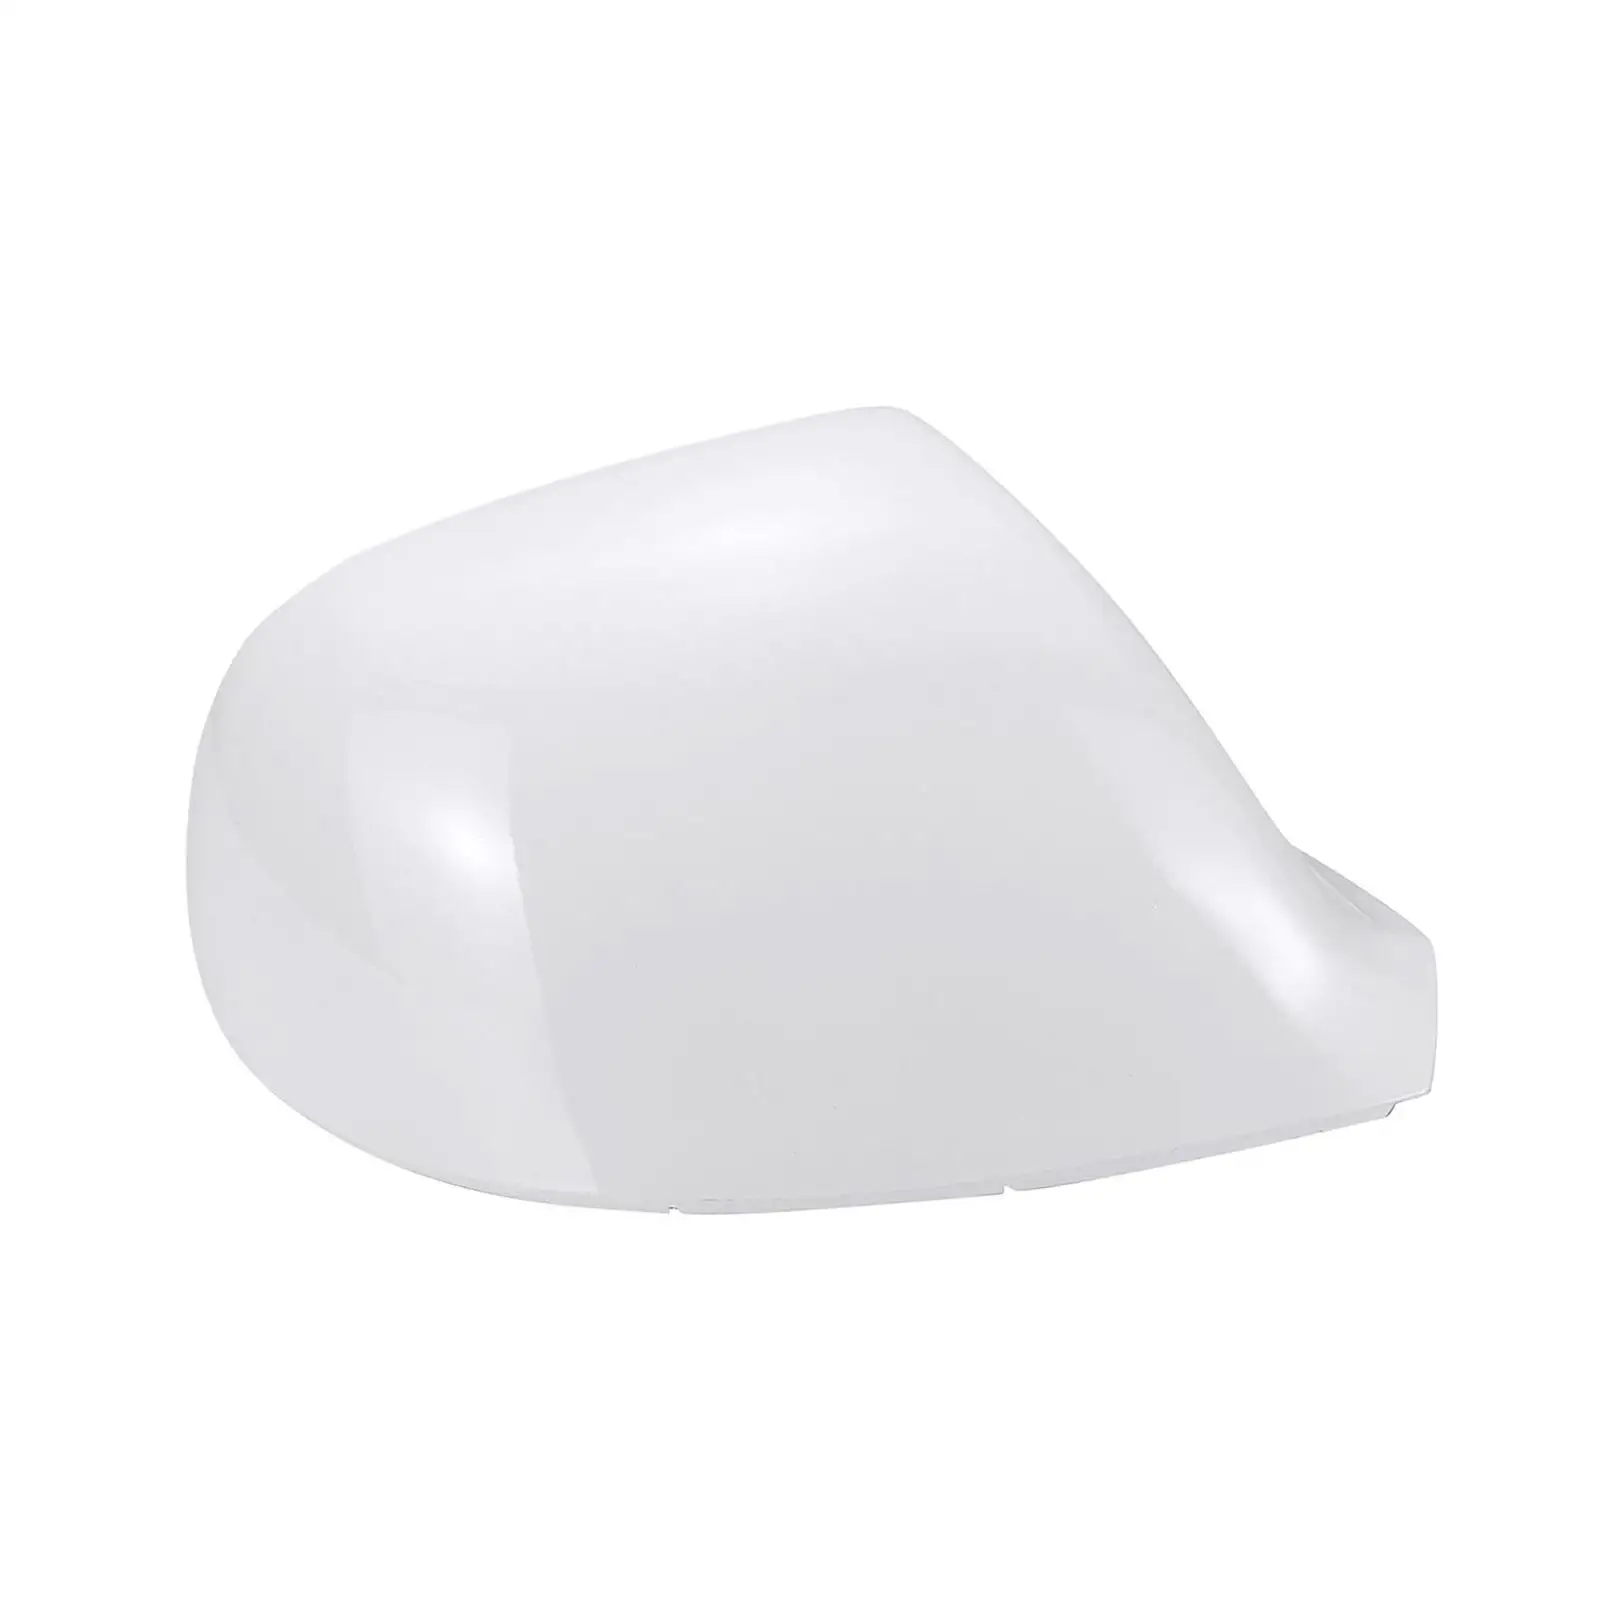 Car Rear View Side Mirror Cover Cap for VW Transporter Durable Spare Parts High Performance